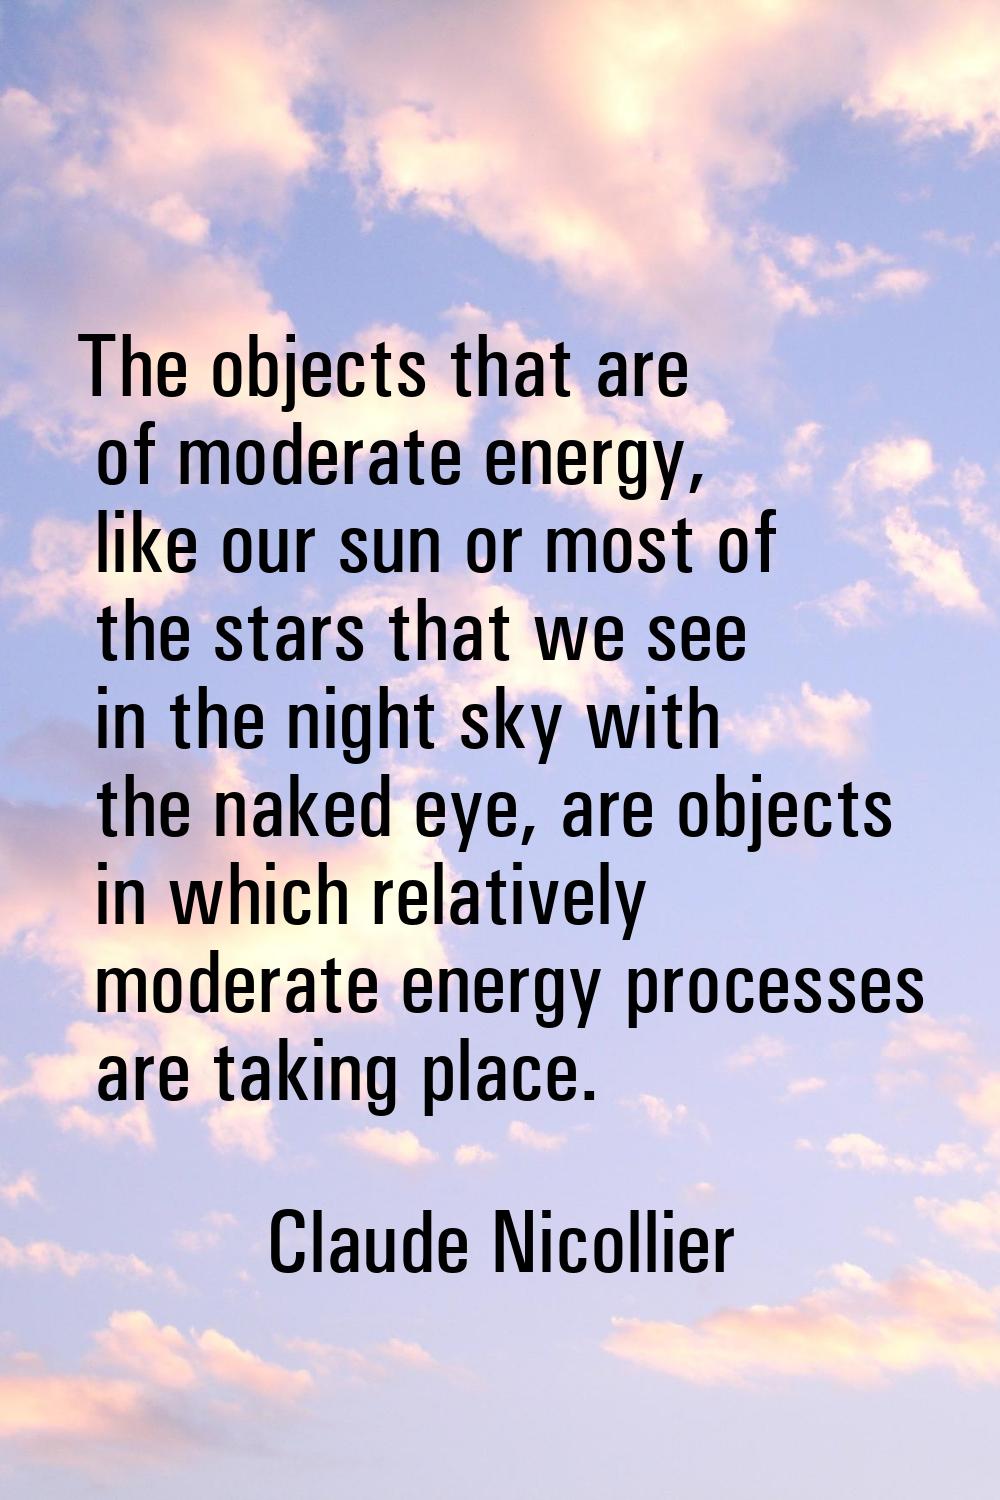 The objects that are of moderate energy, like our sun or most of the stars that we see in the night